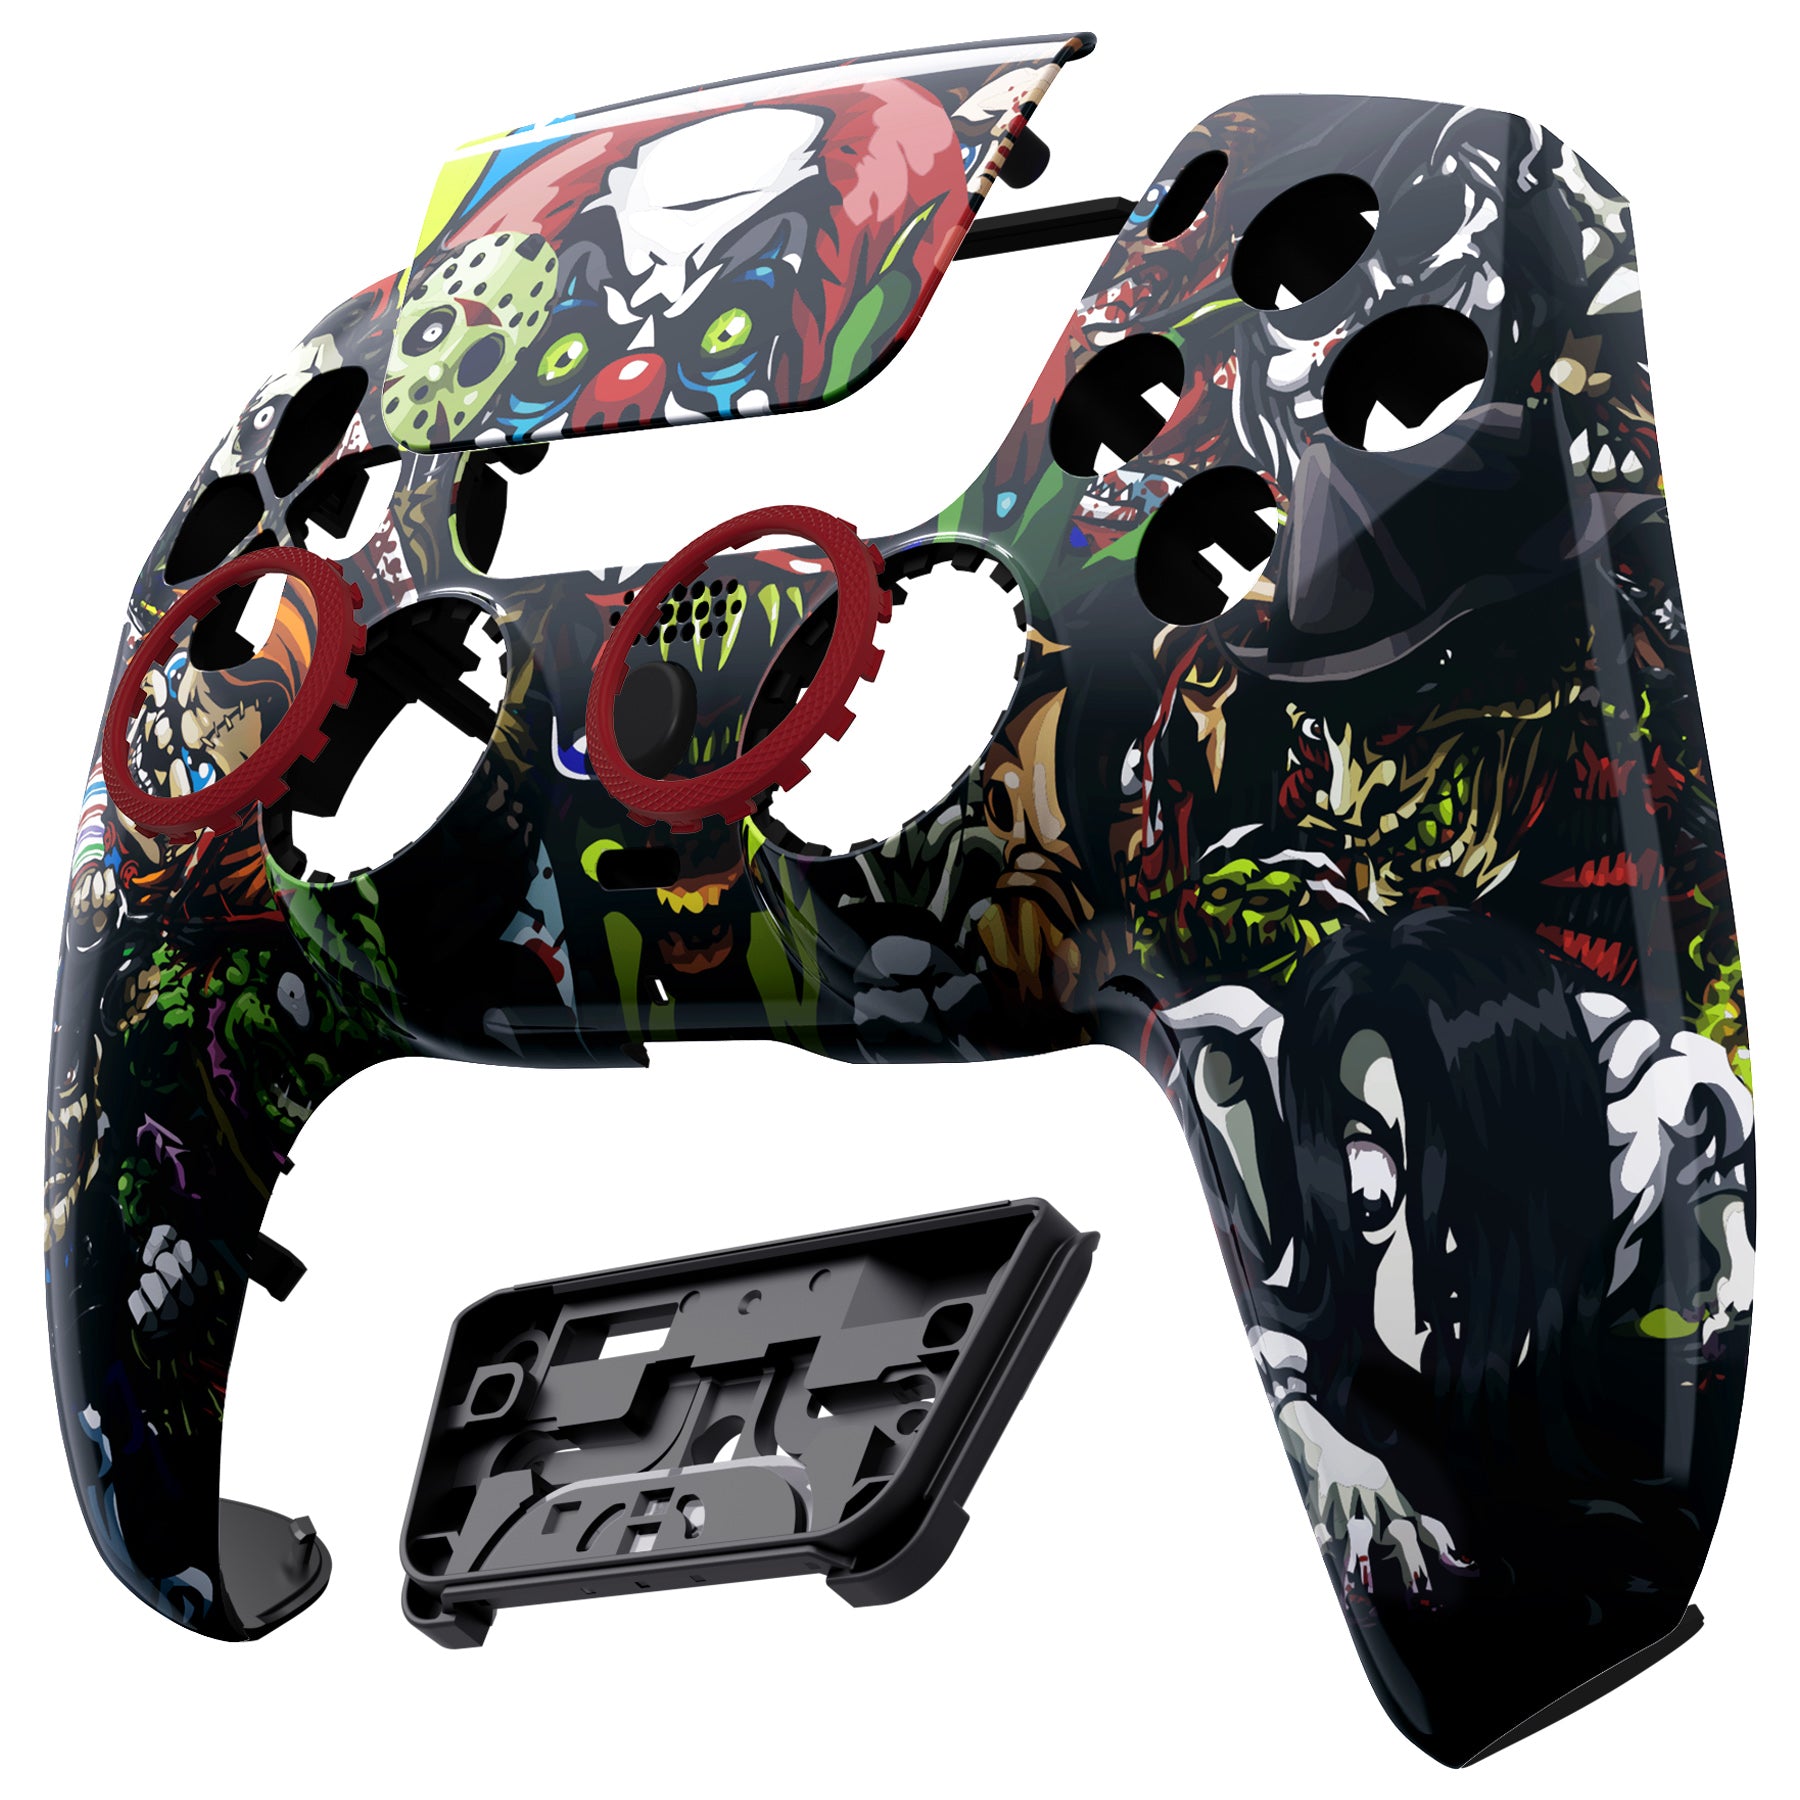 eXtremeRate LUNA Redesigned Replacement Front Shell with Touchpad Compatible with PS5 Controller BDM-010/020/030/040 - Scary Party eXtremeRate